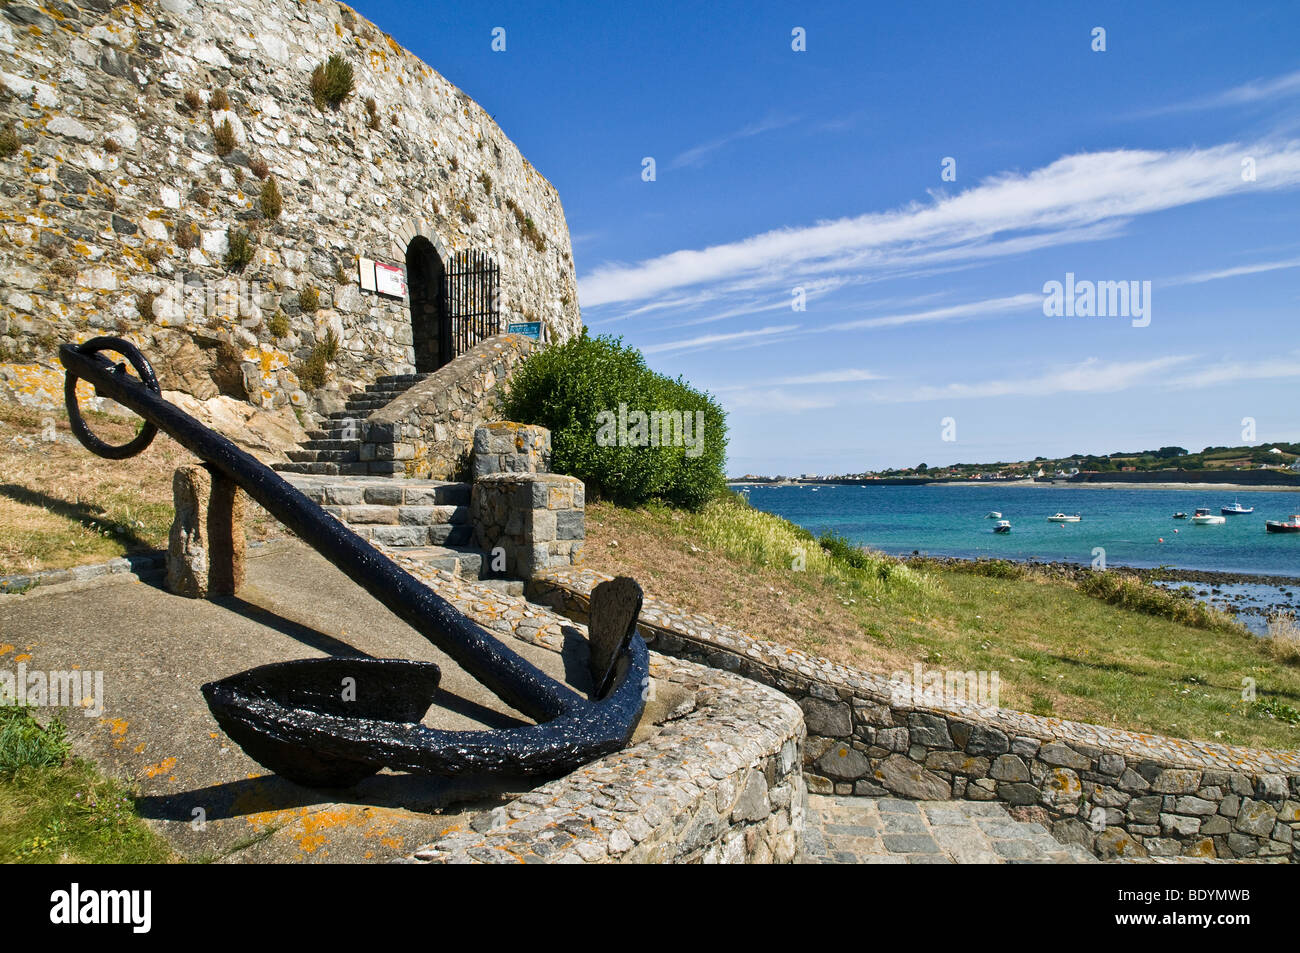 dh Fort Grey ST PIERRE DU BOIS GUERNSEY Anchor Shipwreck museum Rocquaine Bay Martello tower fortress channel islands Stock Photo